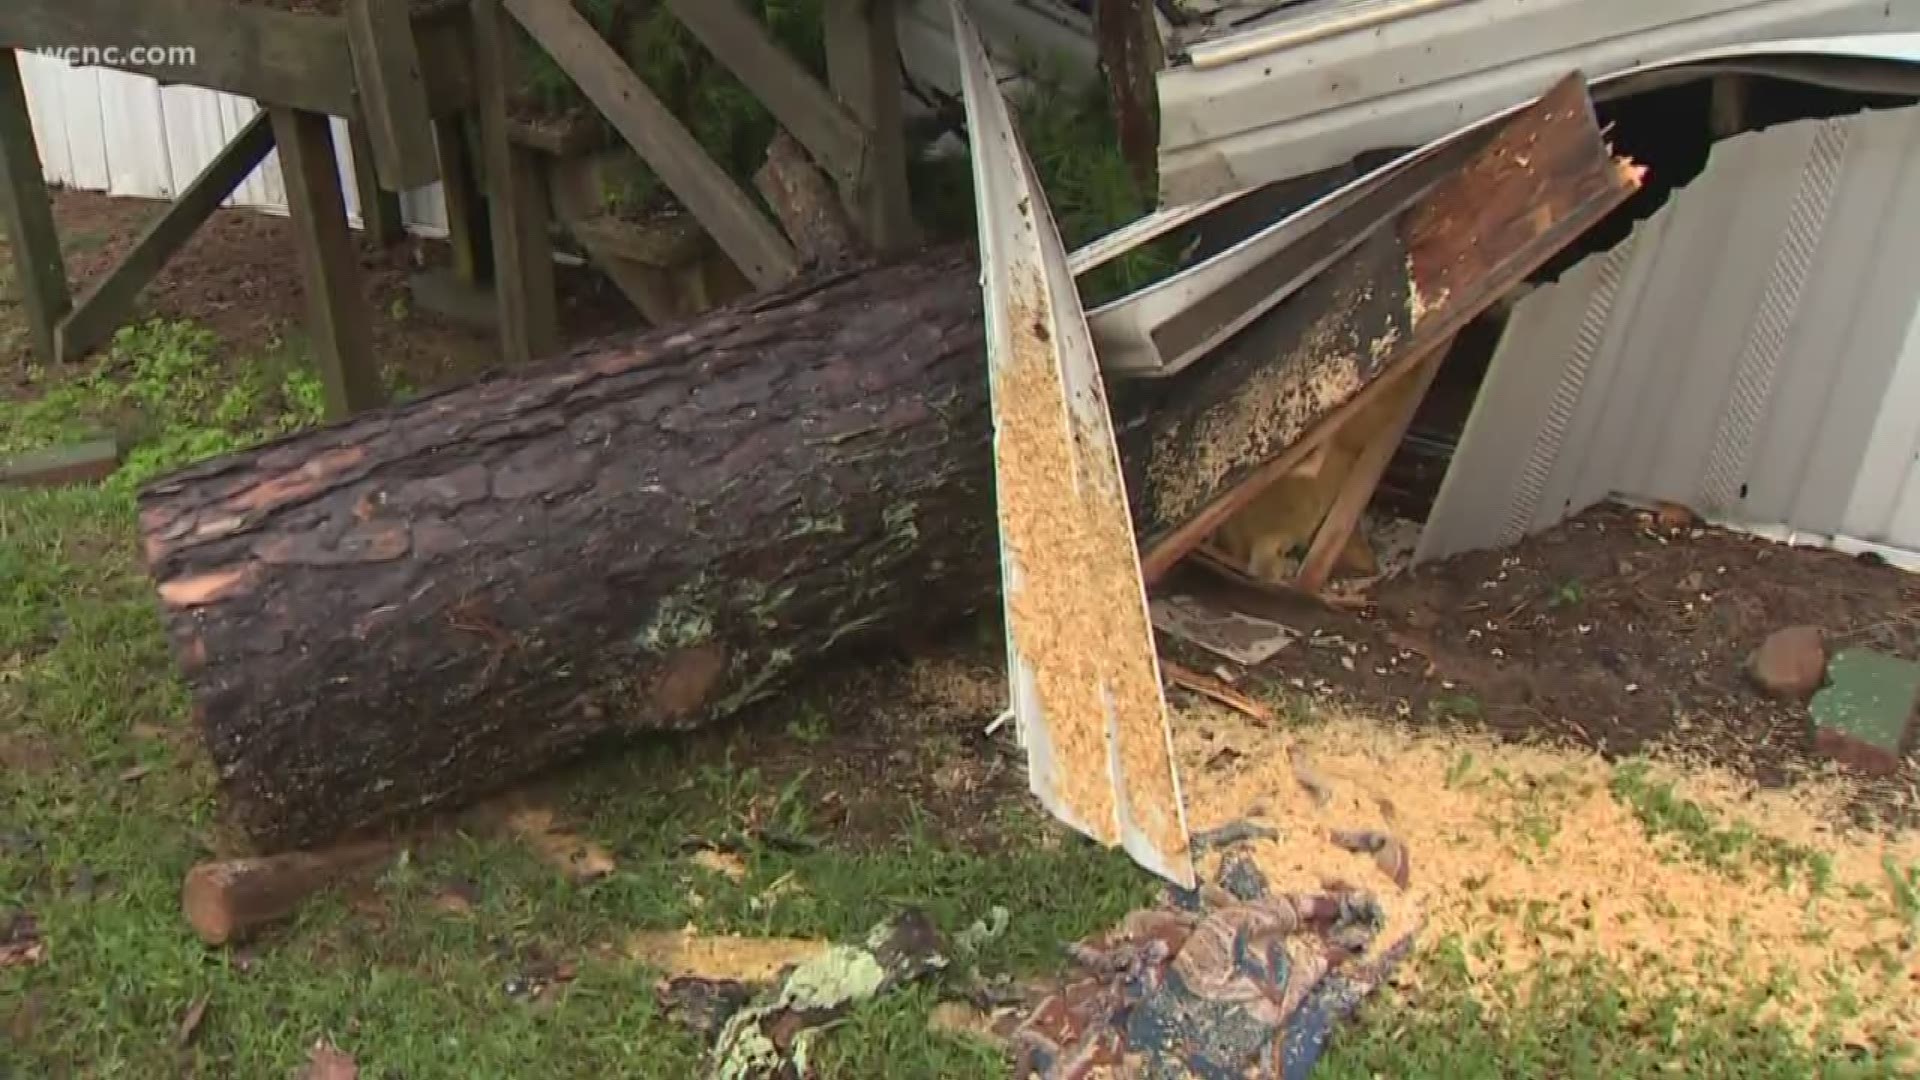 A 3-month-old baby boy was tragically killed when a tree fell on a mobile home.